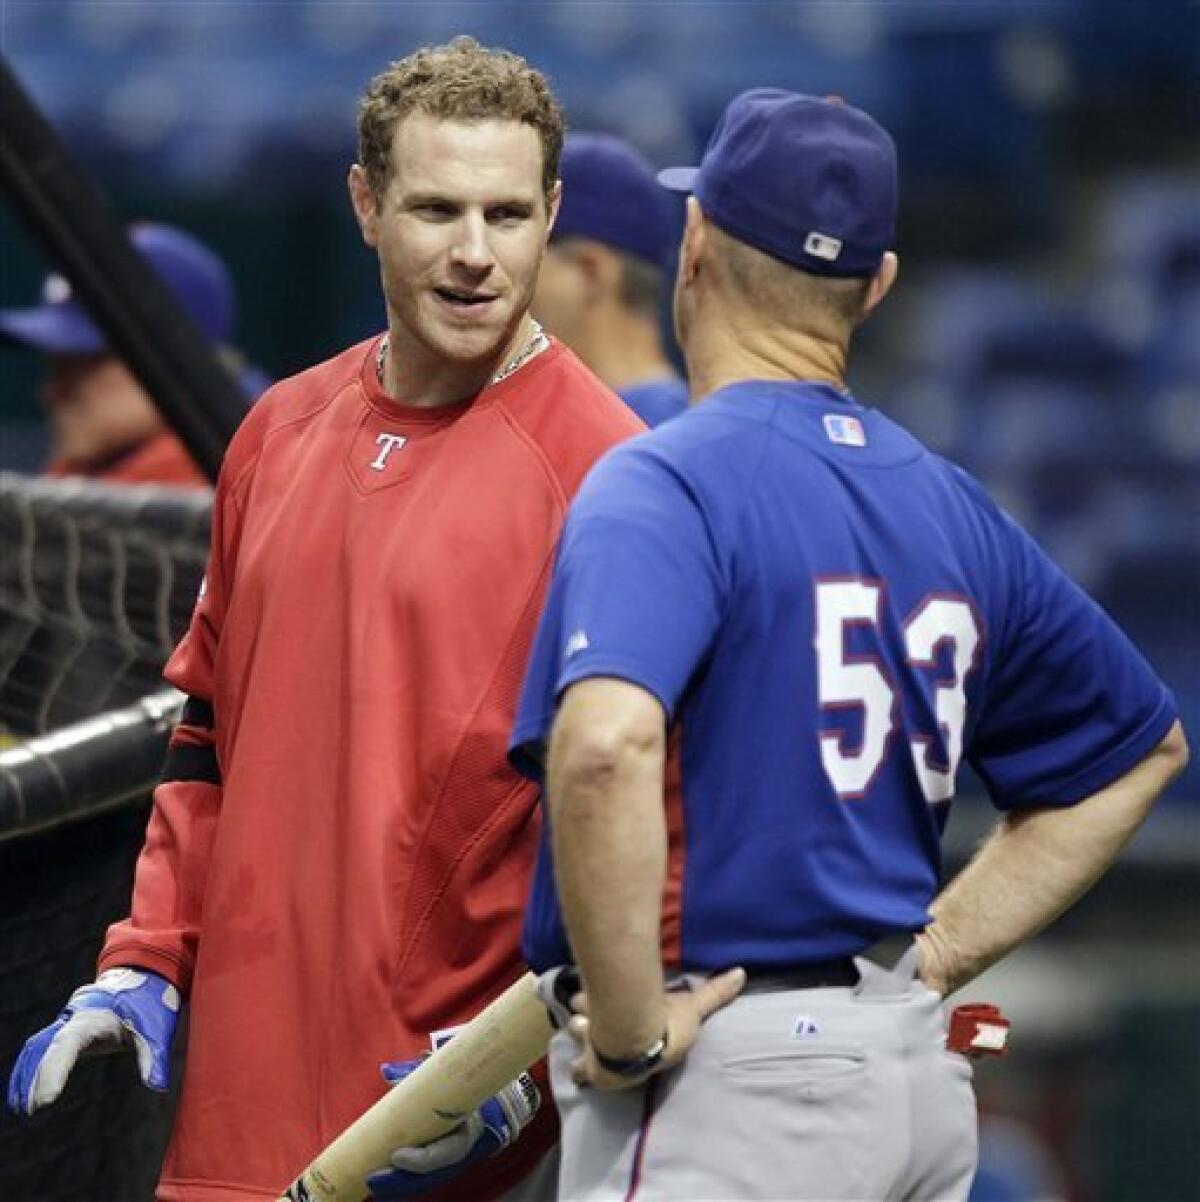 Rangers slugger Hamilton excited to face old team - The San Diego